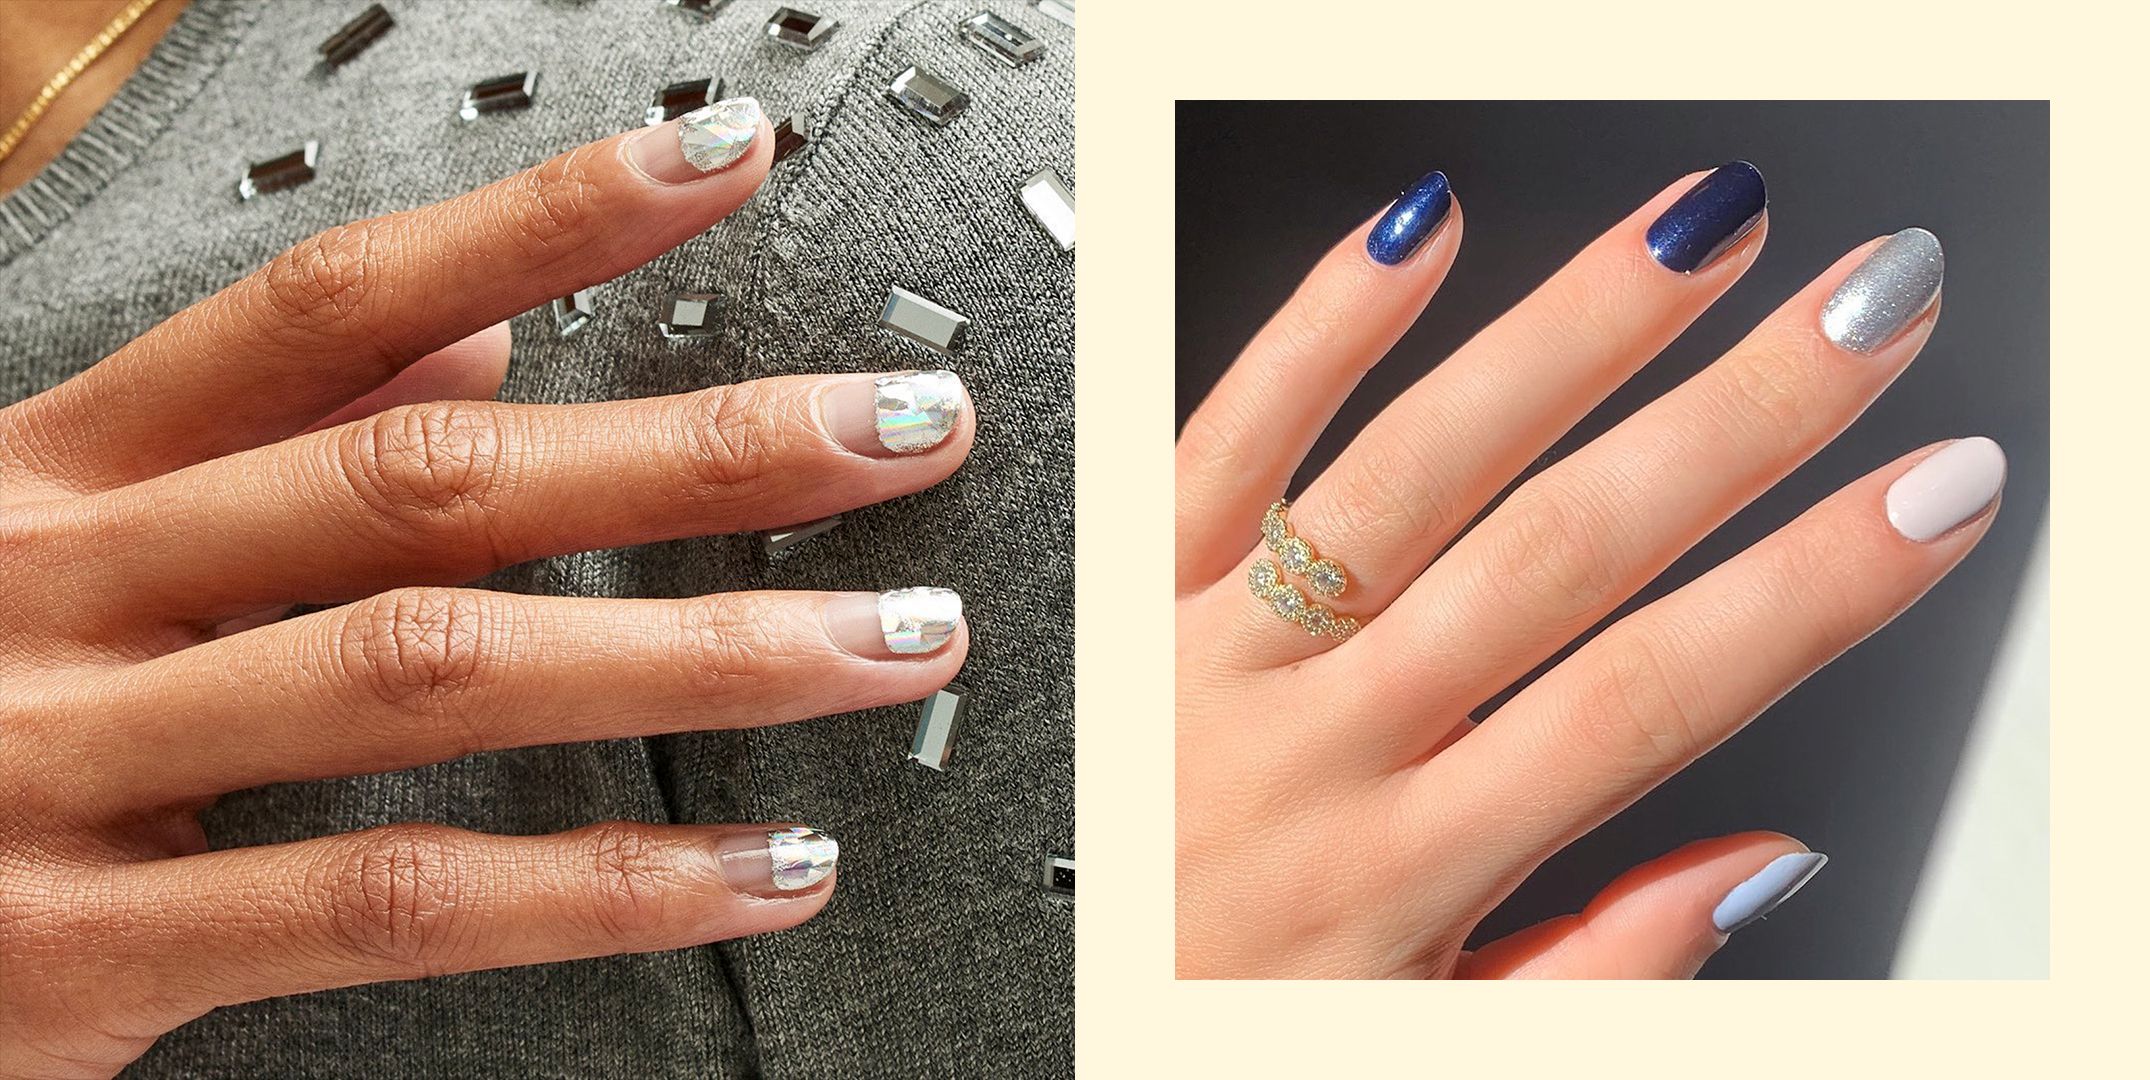 Nail art ideas: 17 easy and on-trend designs to try - beautyheaven